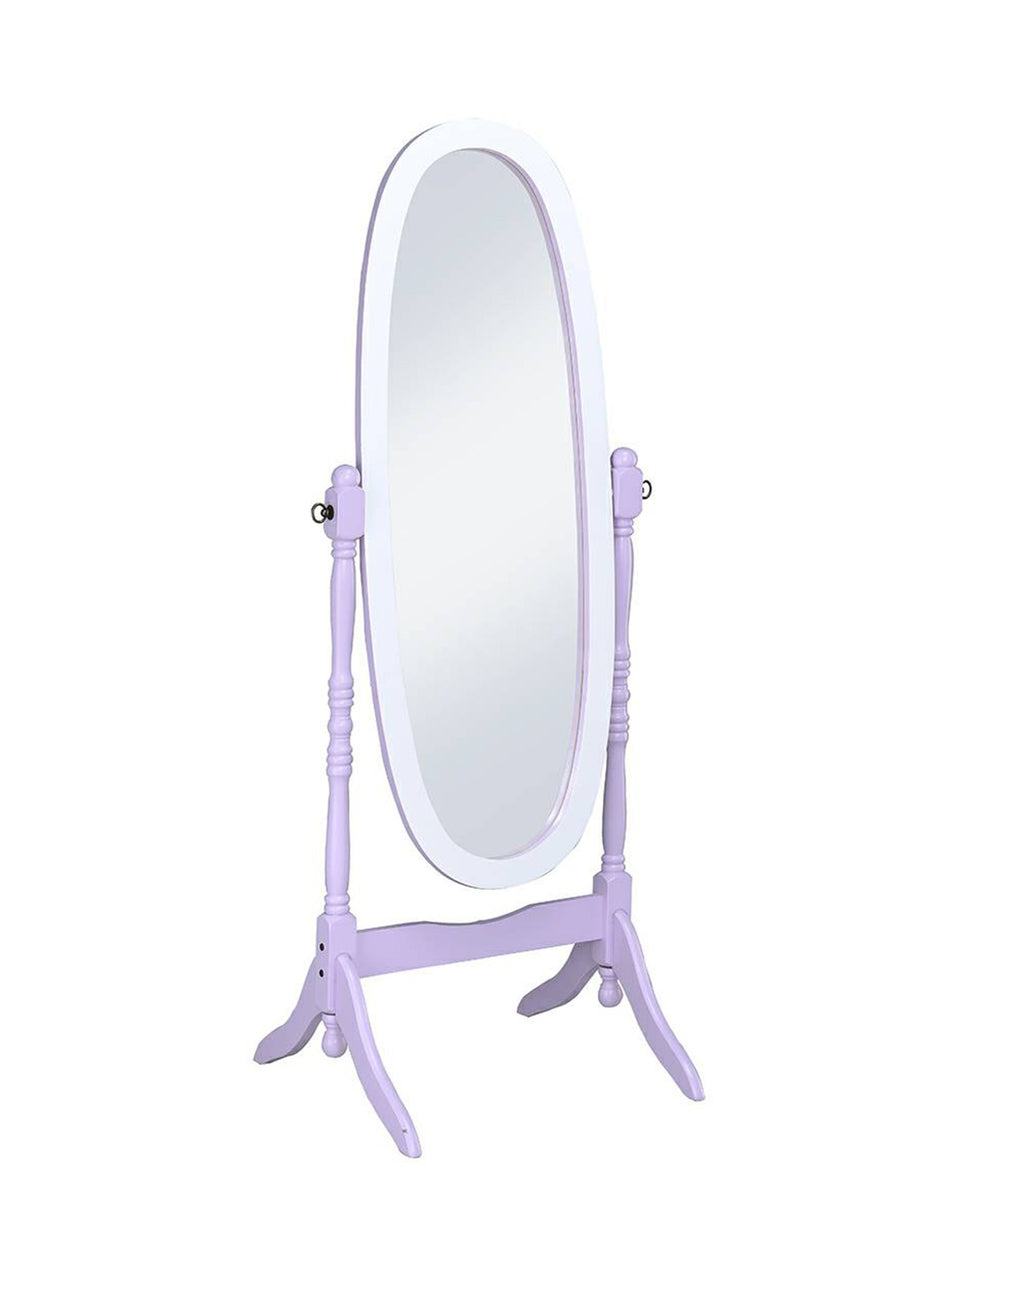 Pretty Pastel Purple and White Cheval Standing Oval Mirror - 99fab 